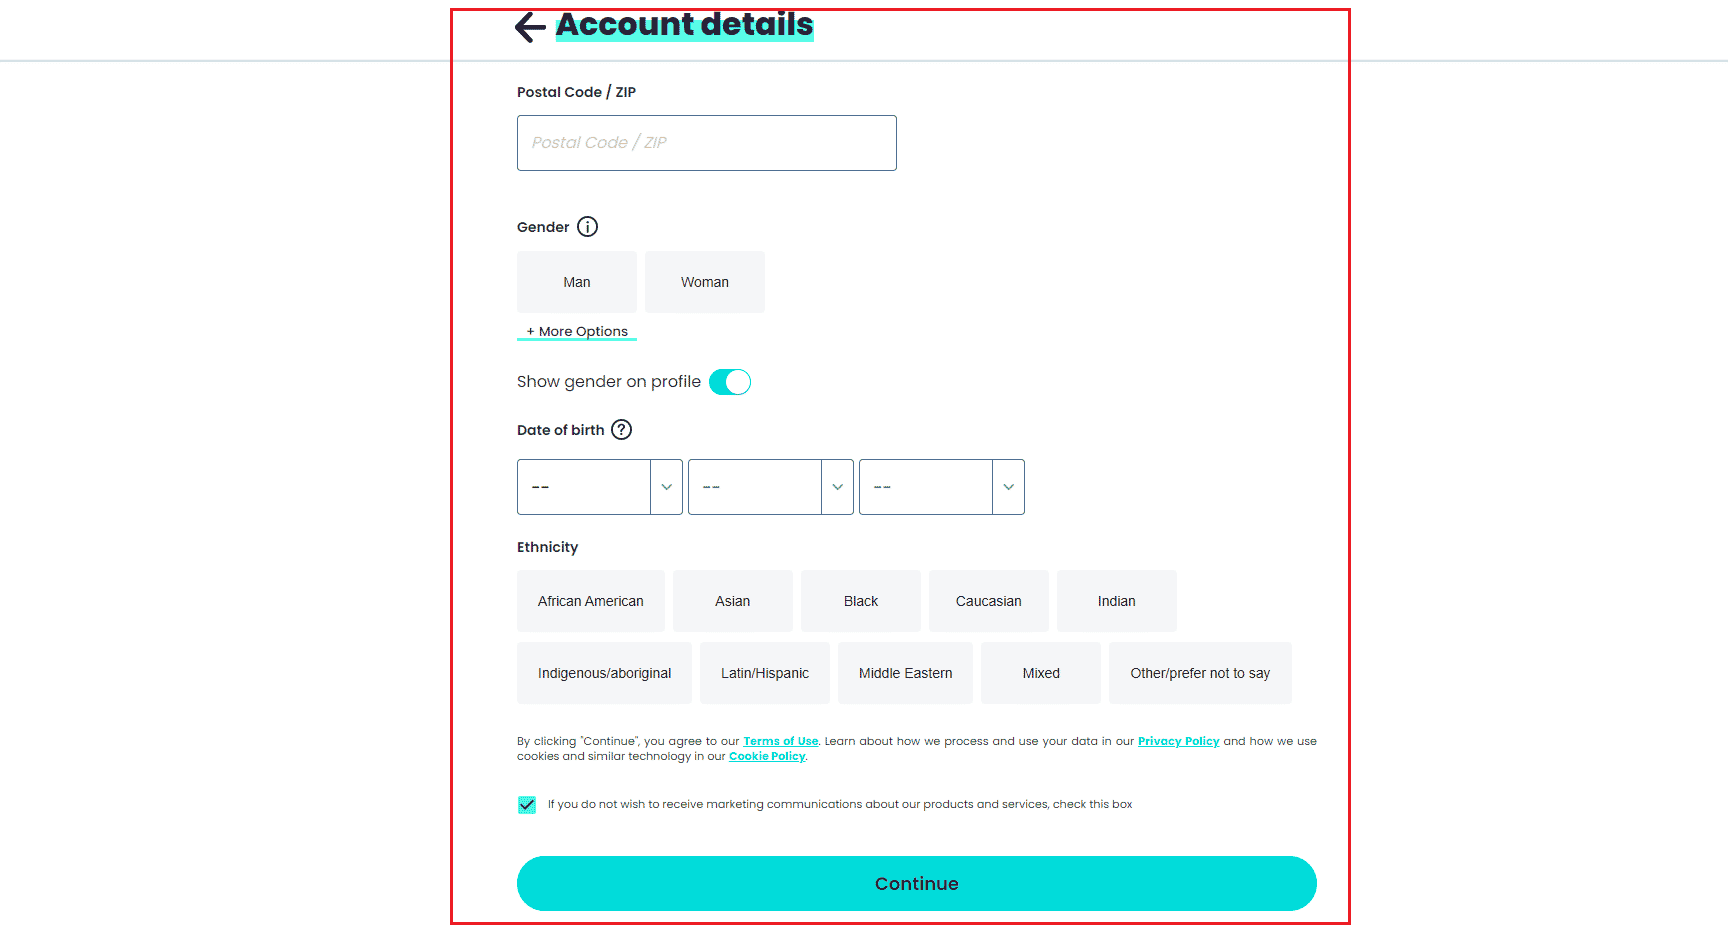 enter account details and click on continue